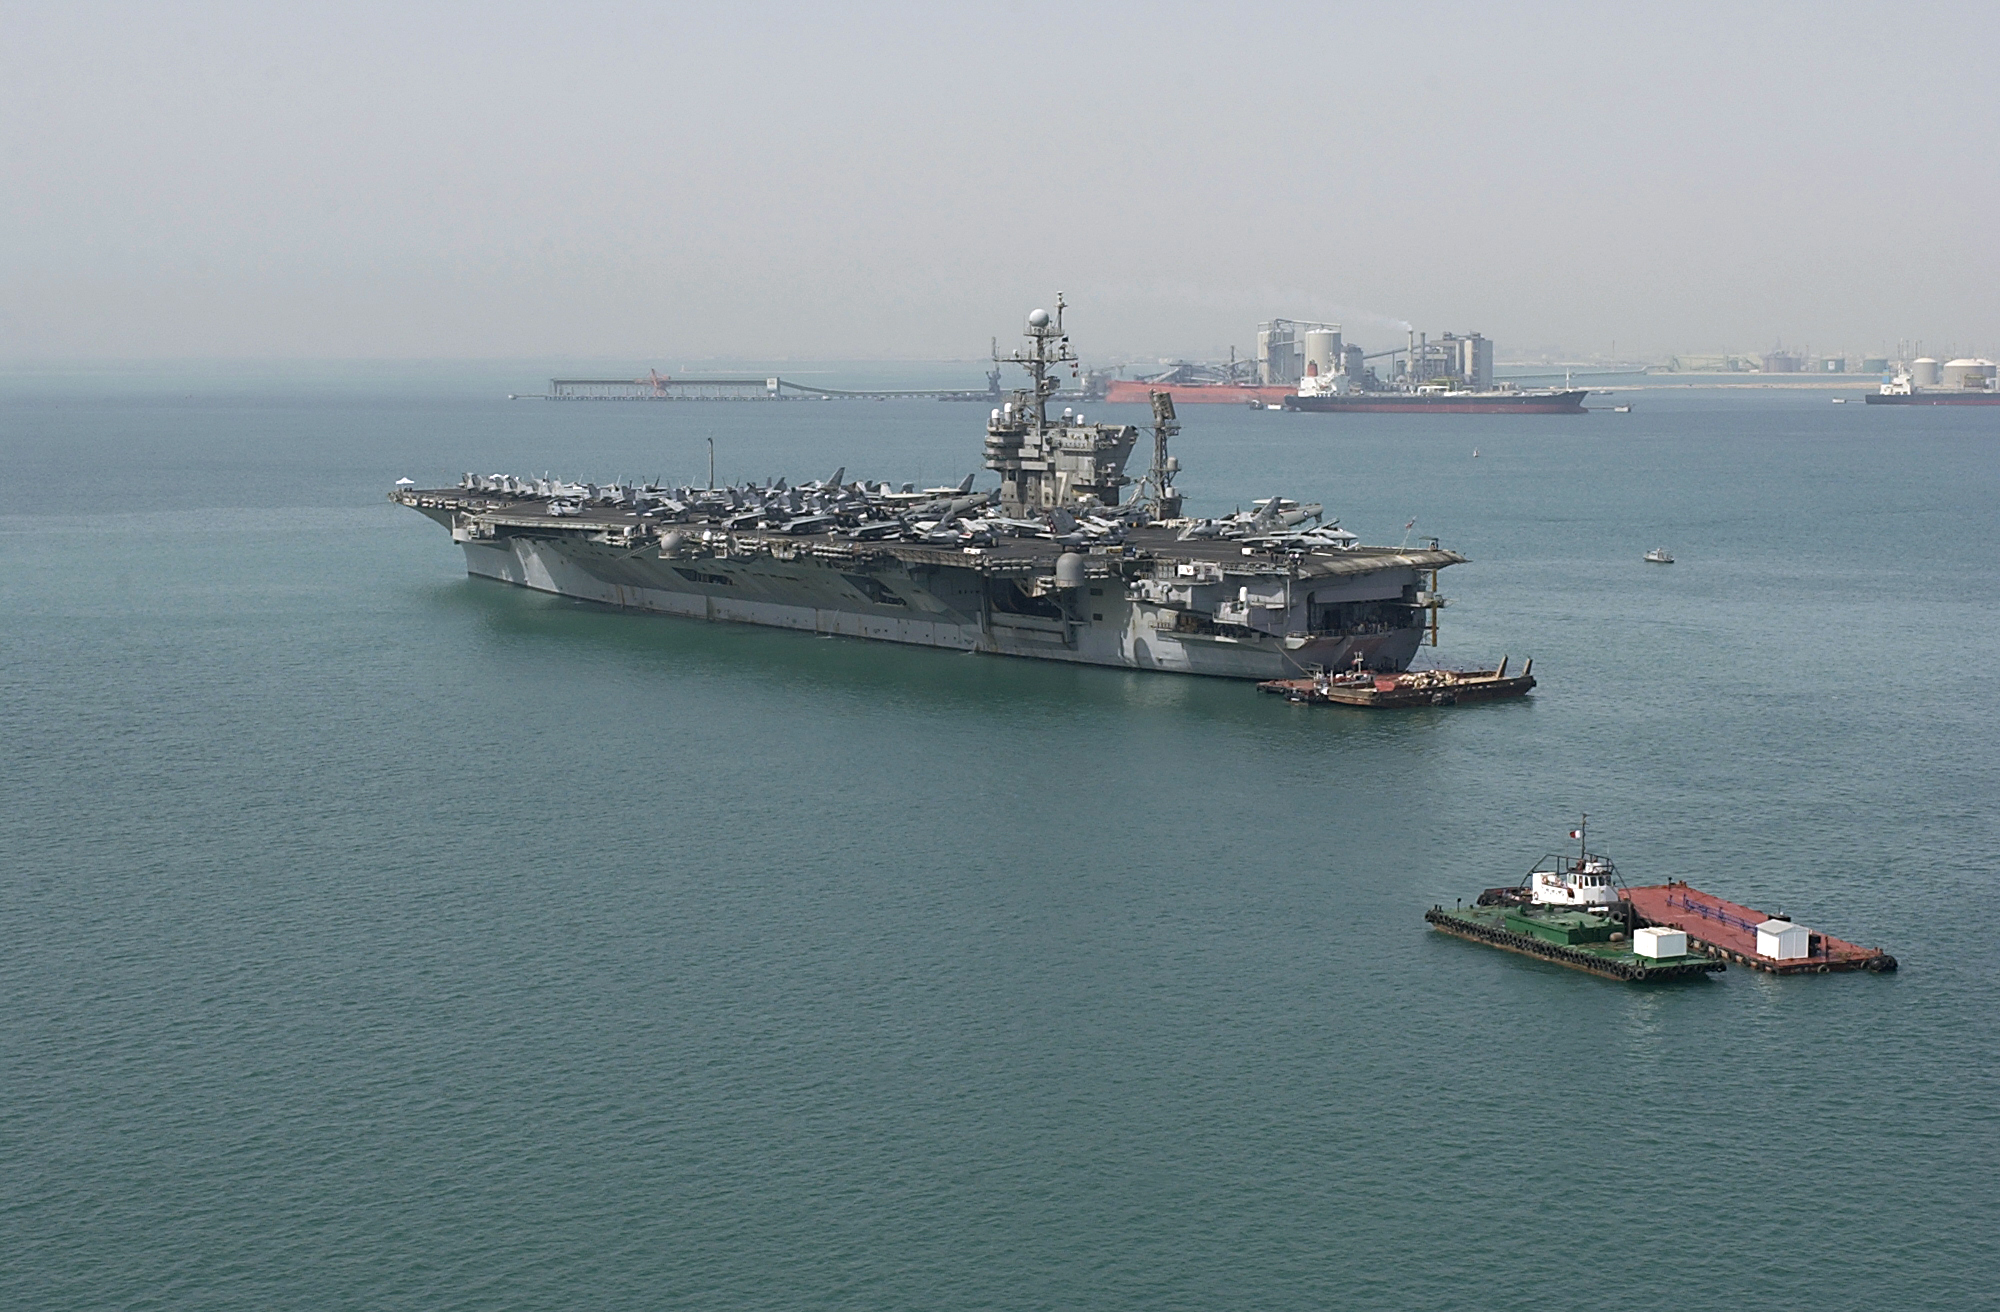 US Navy 040810-N-1348L-002 Tug boats and barges stand by as the aircraft carrier USS John F. Kennedy (CV 67) prepares to get underway after a five-day port visit to Bahrain